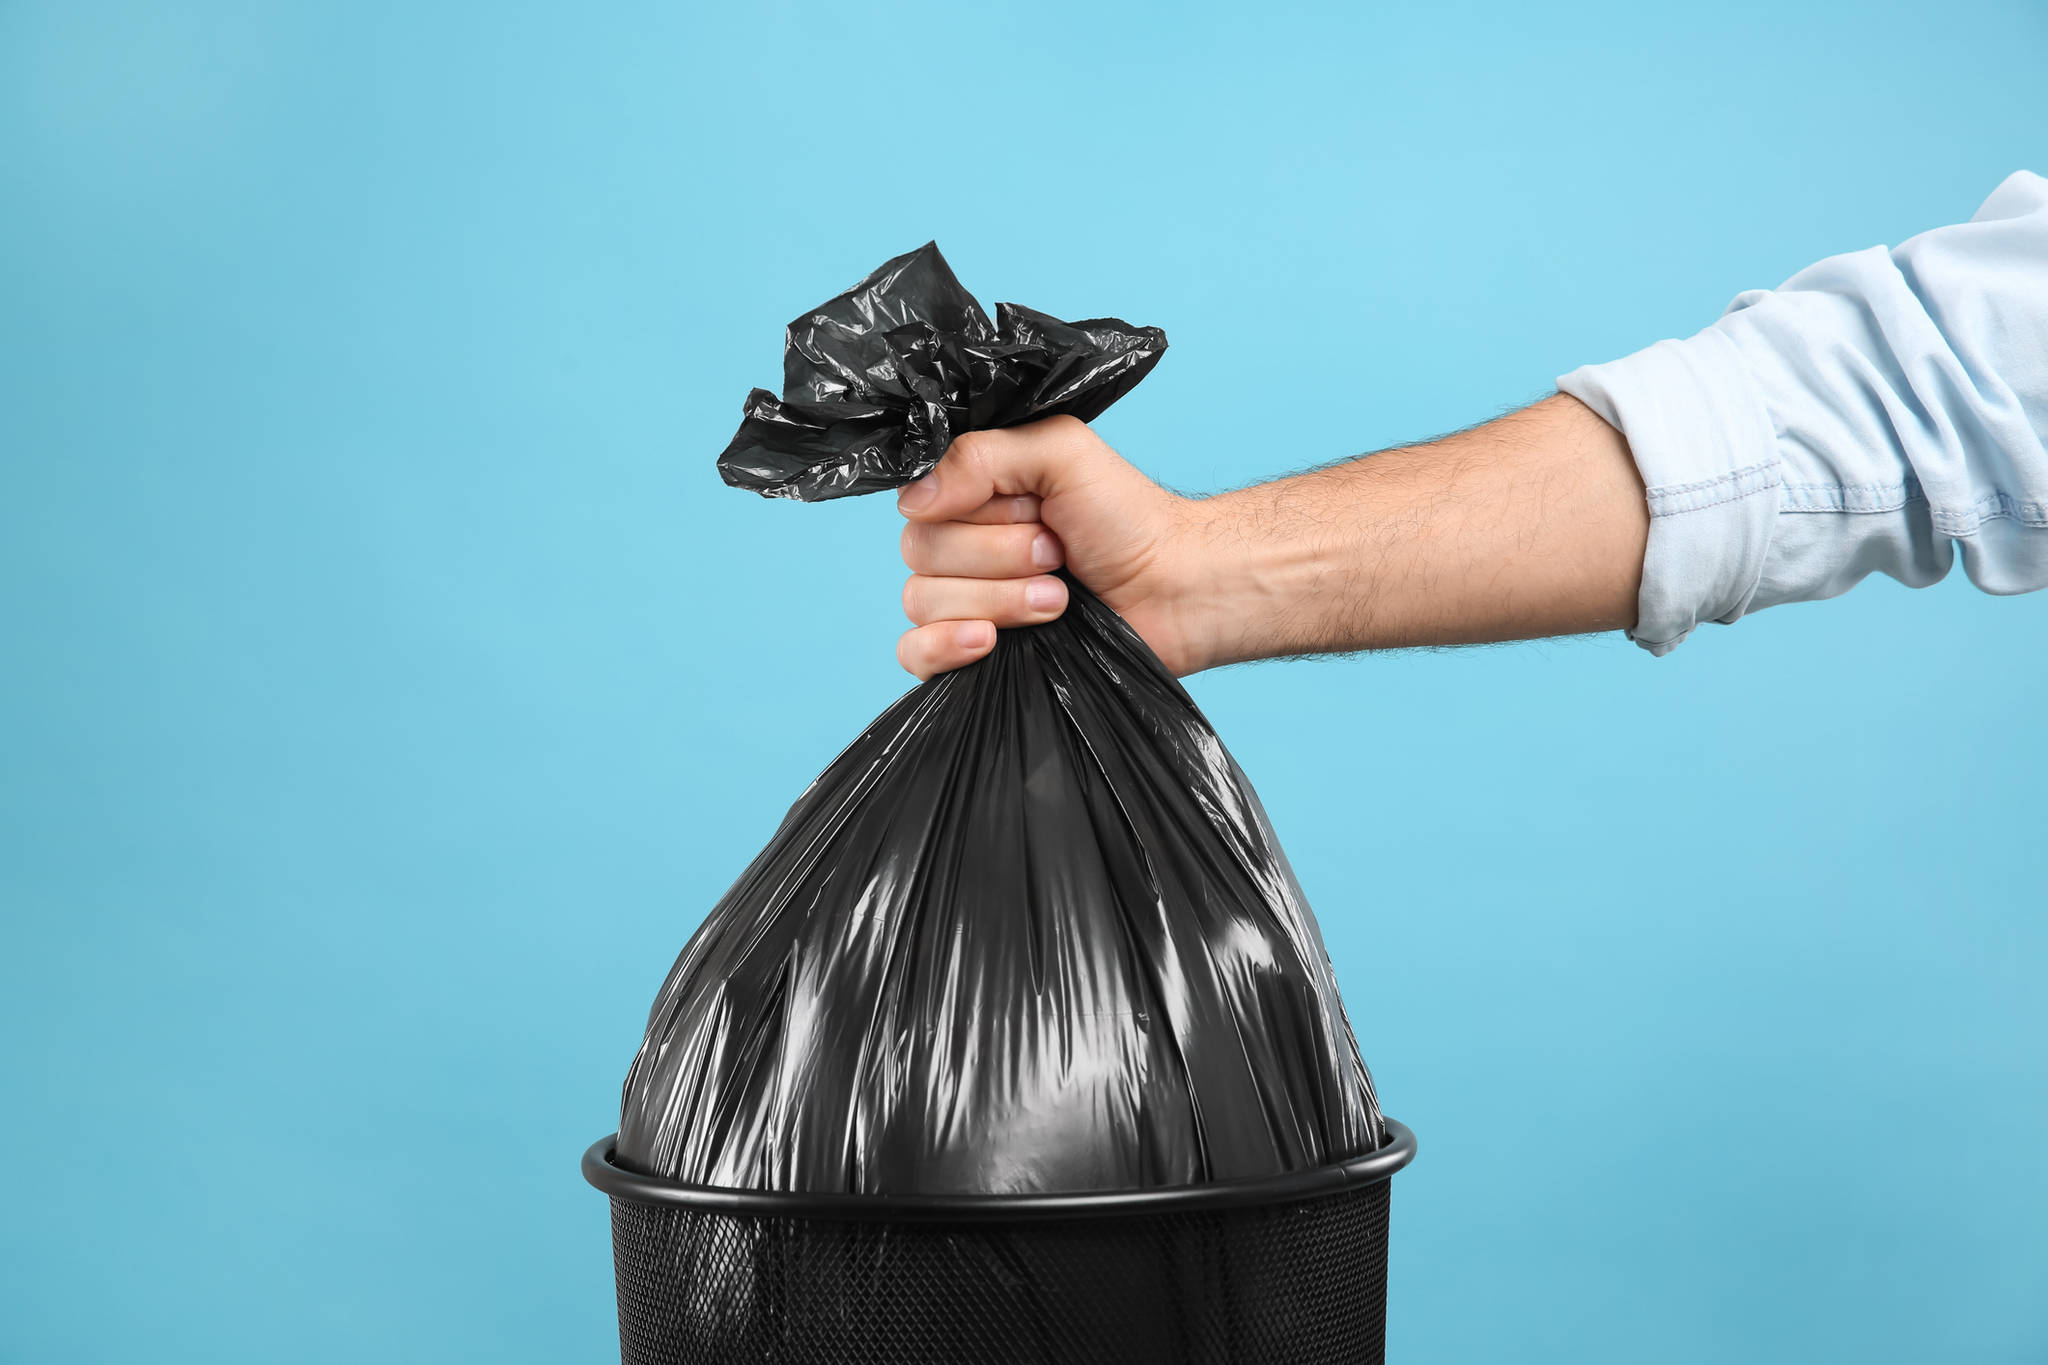 Getty Images
Sort through your garbage, recycling and compost to find ways to improve your shopping and sorting habits. (Getty Images)
Sort through your garbage, recycling and compost to find ways to improve your shopping and sorting habits. (Getty Images)